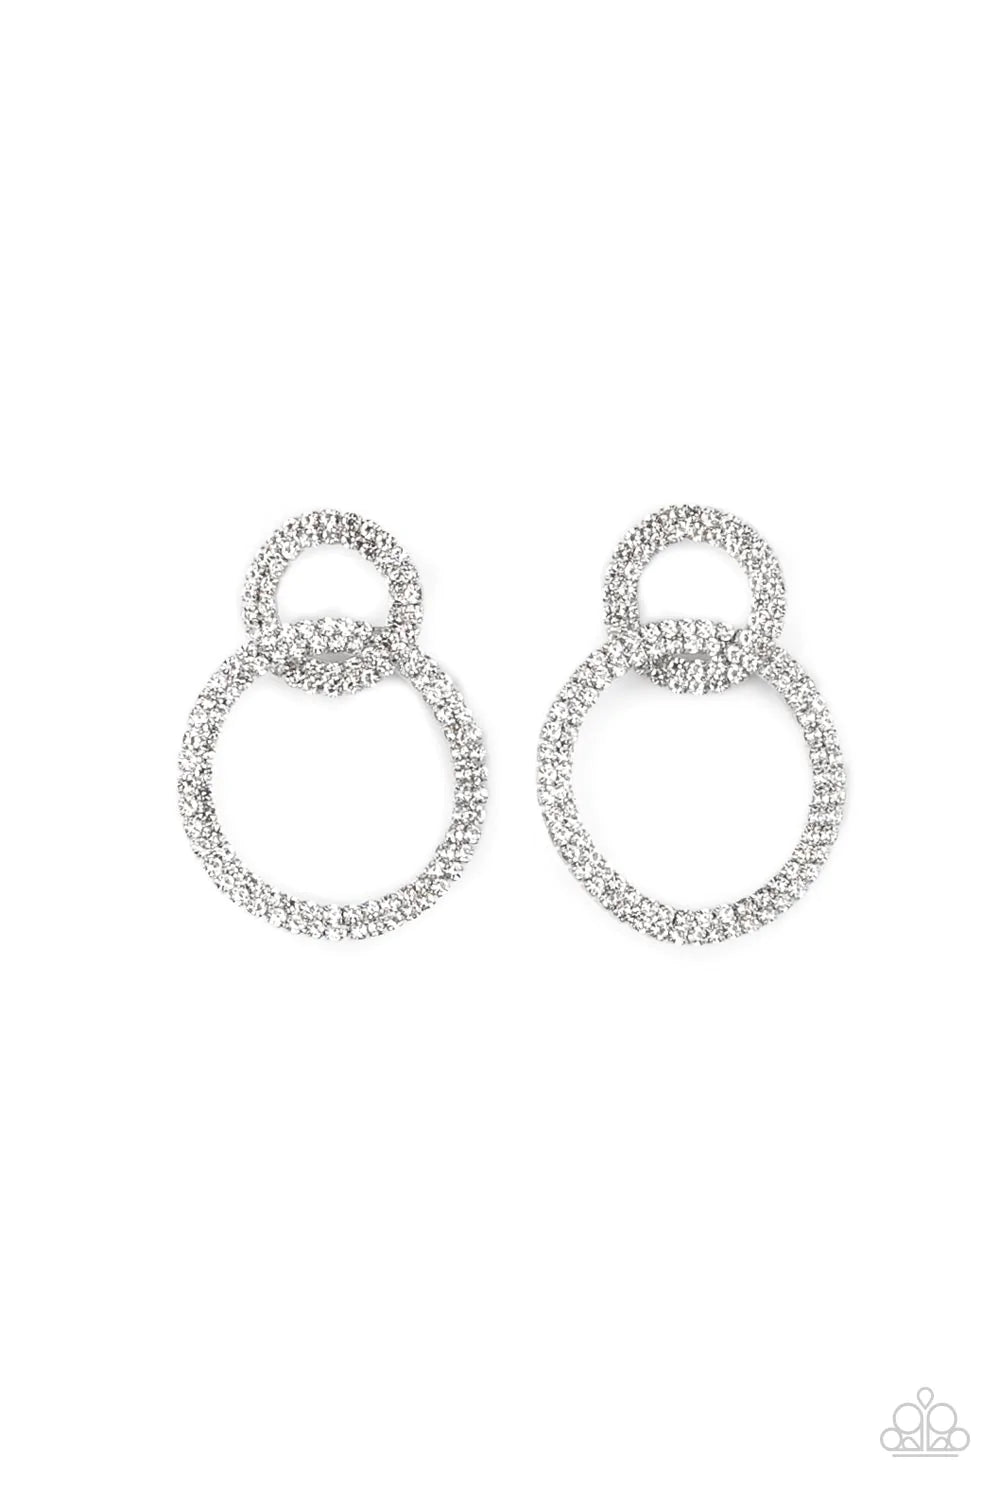 Paparazzi Accessories Intensely Icy - White Rows of sparkly white rhinestones encircle into two interconnected hoops, creating a jaw-dropping lure. Earring attaches to a standard post fitting. Sold as one pair of post earrings.